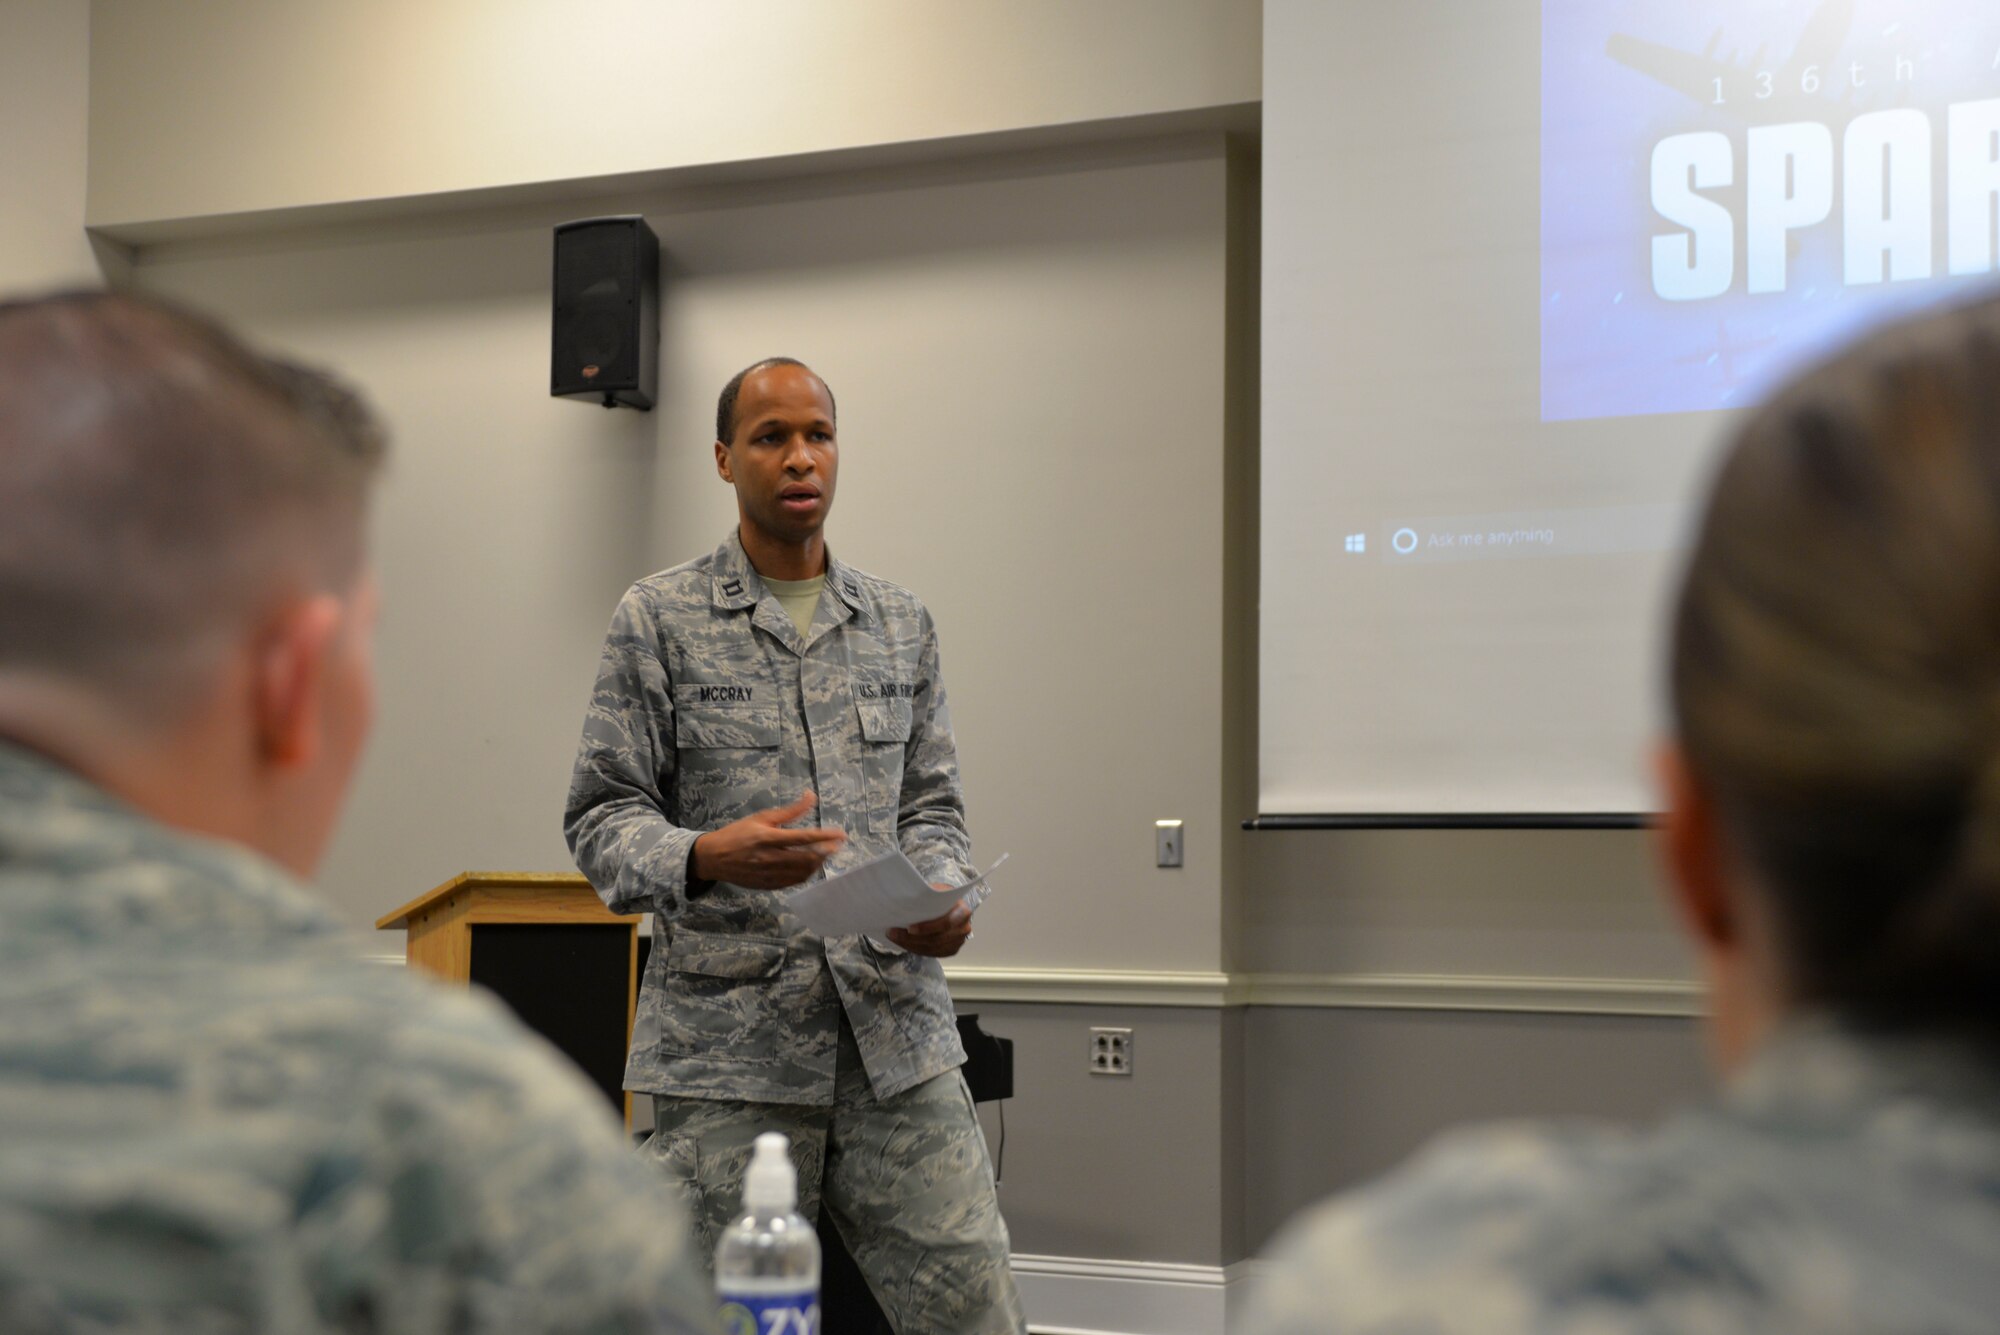 U.S. Air Force Capt. Jeremy McCray, 136th Medical Group Medical Service Corps officer, presents his idea for a secure, digital faxing system to a panel of 136th Airlift Wing Airmen during the wing’s Spark Tank competition Oct. 20, 2018.  The fax system would enable his unit to send and receive patient’s documents from outside medical providers. (U.S. Air National Guard photo by Senior Airman Bryan Swink)